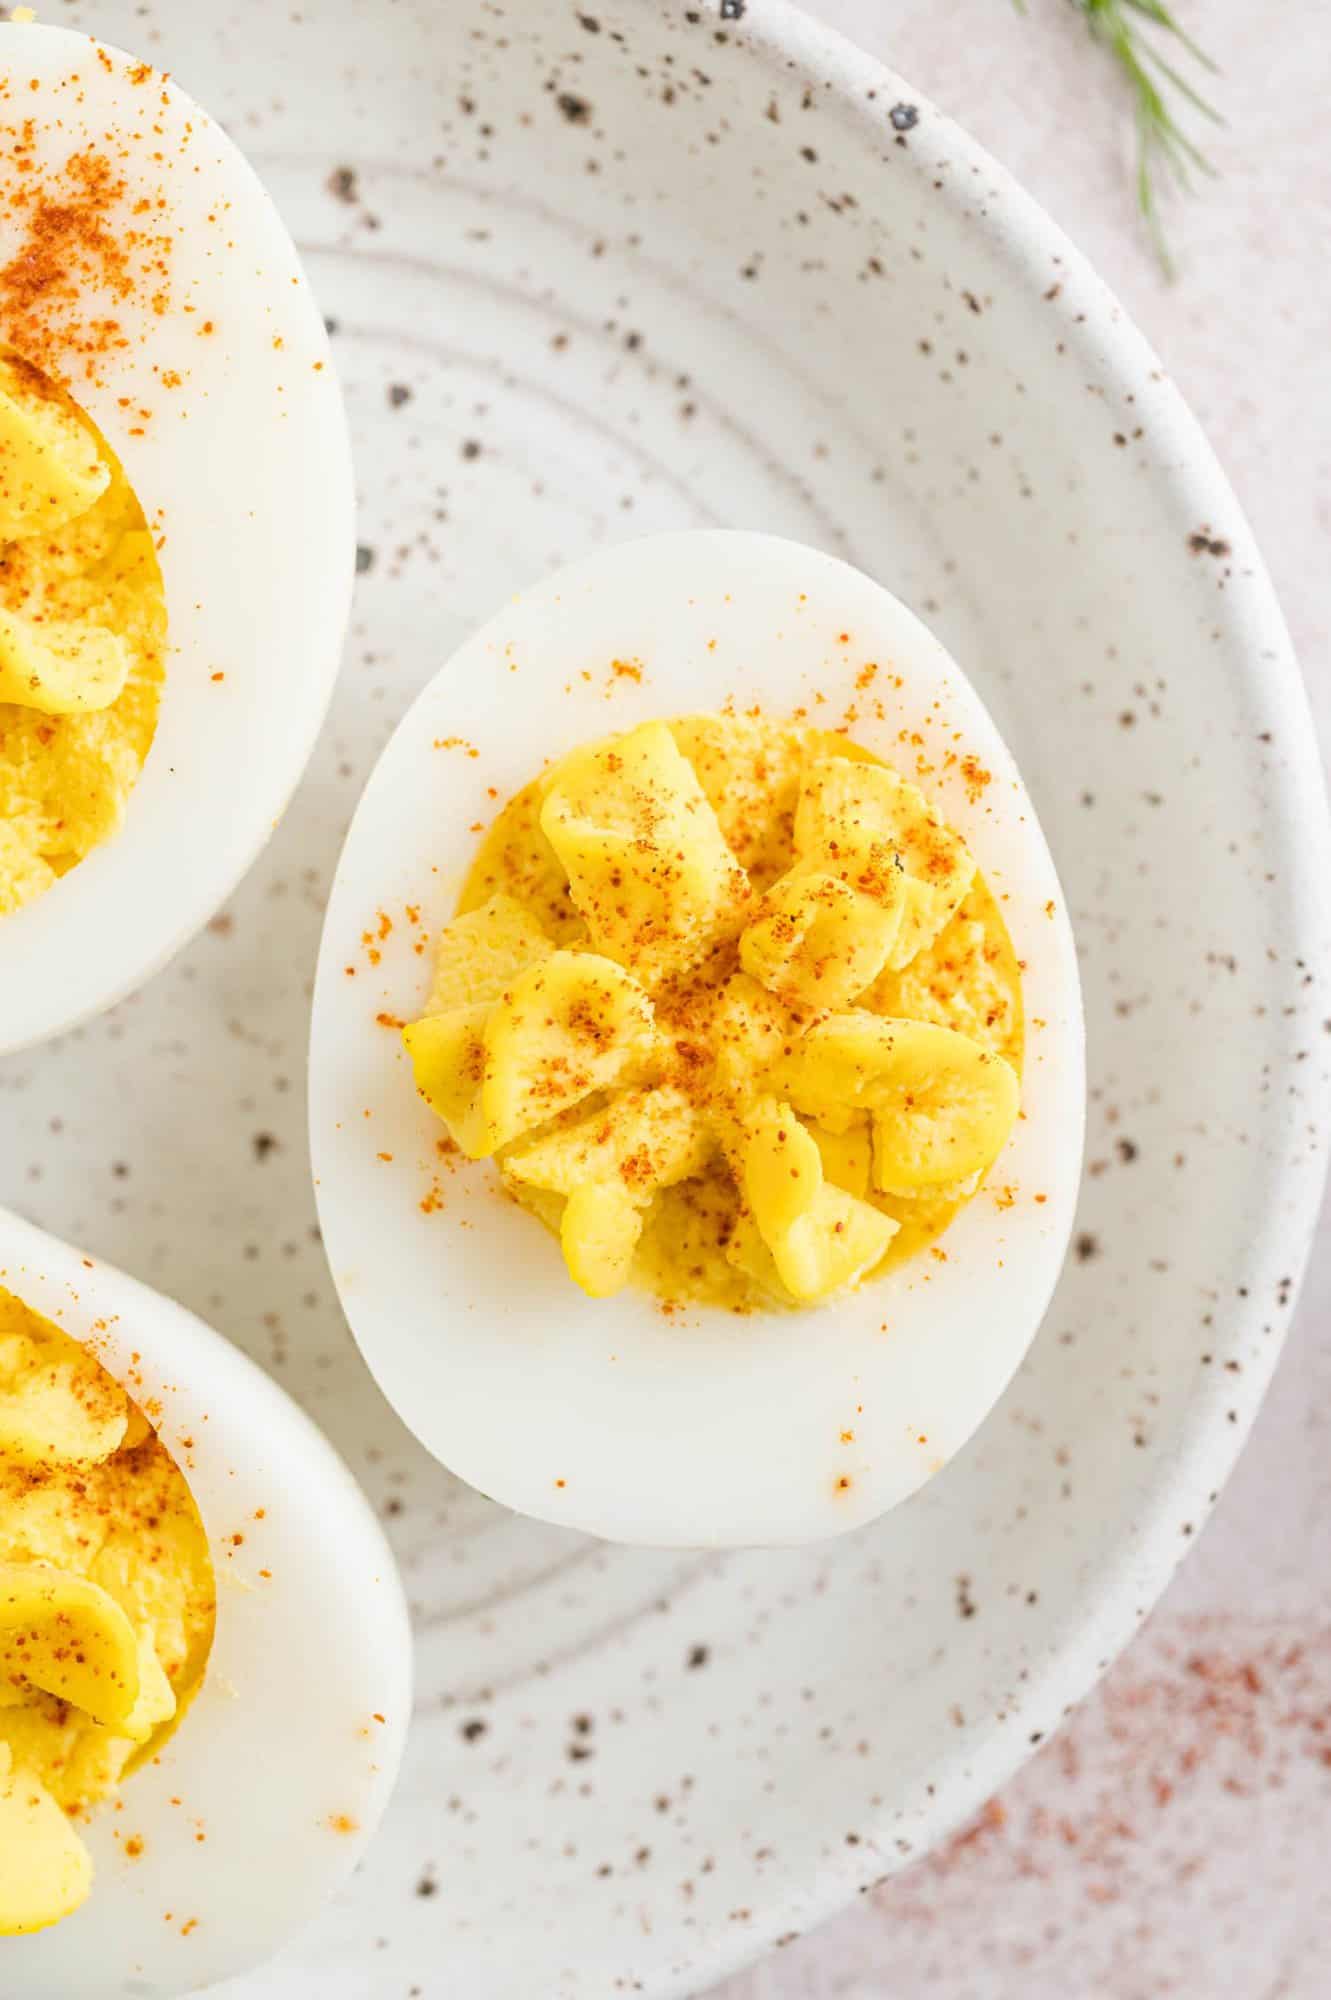 Deviled eggs on a speckled plate.